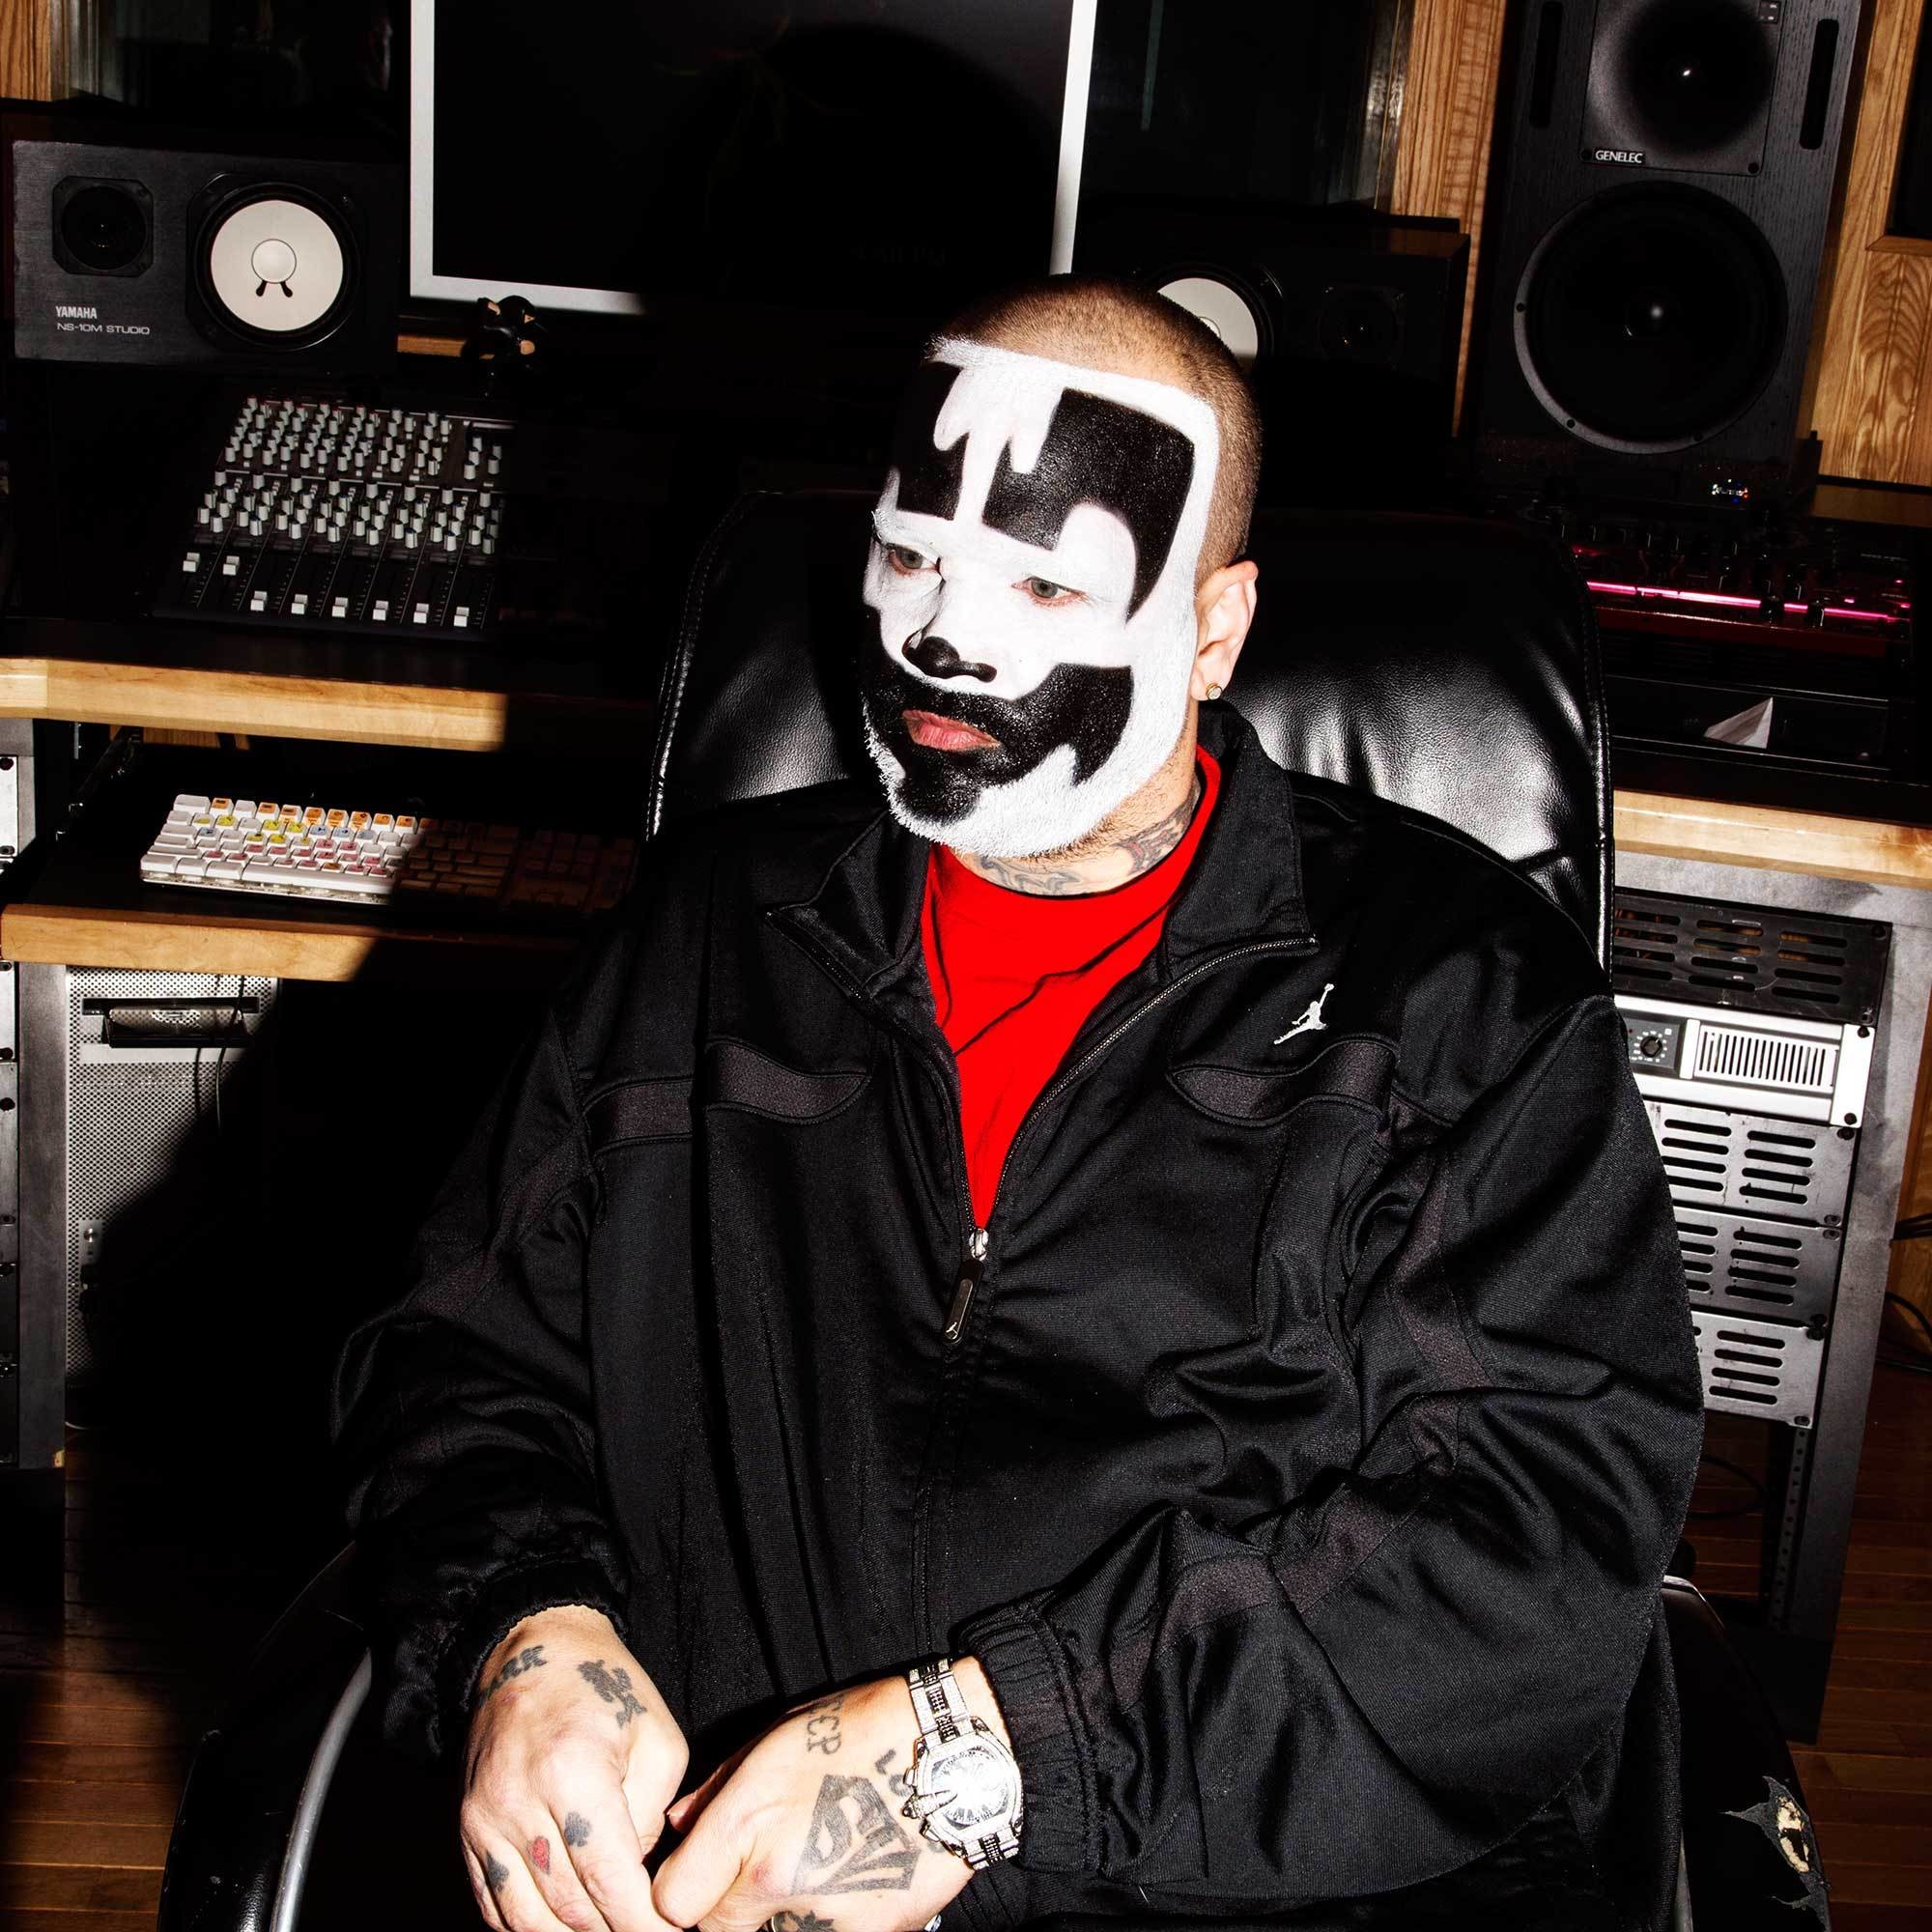 2000x2000 For more juggalos, check out VICE's exclusive profile of Insane Clown Posse.